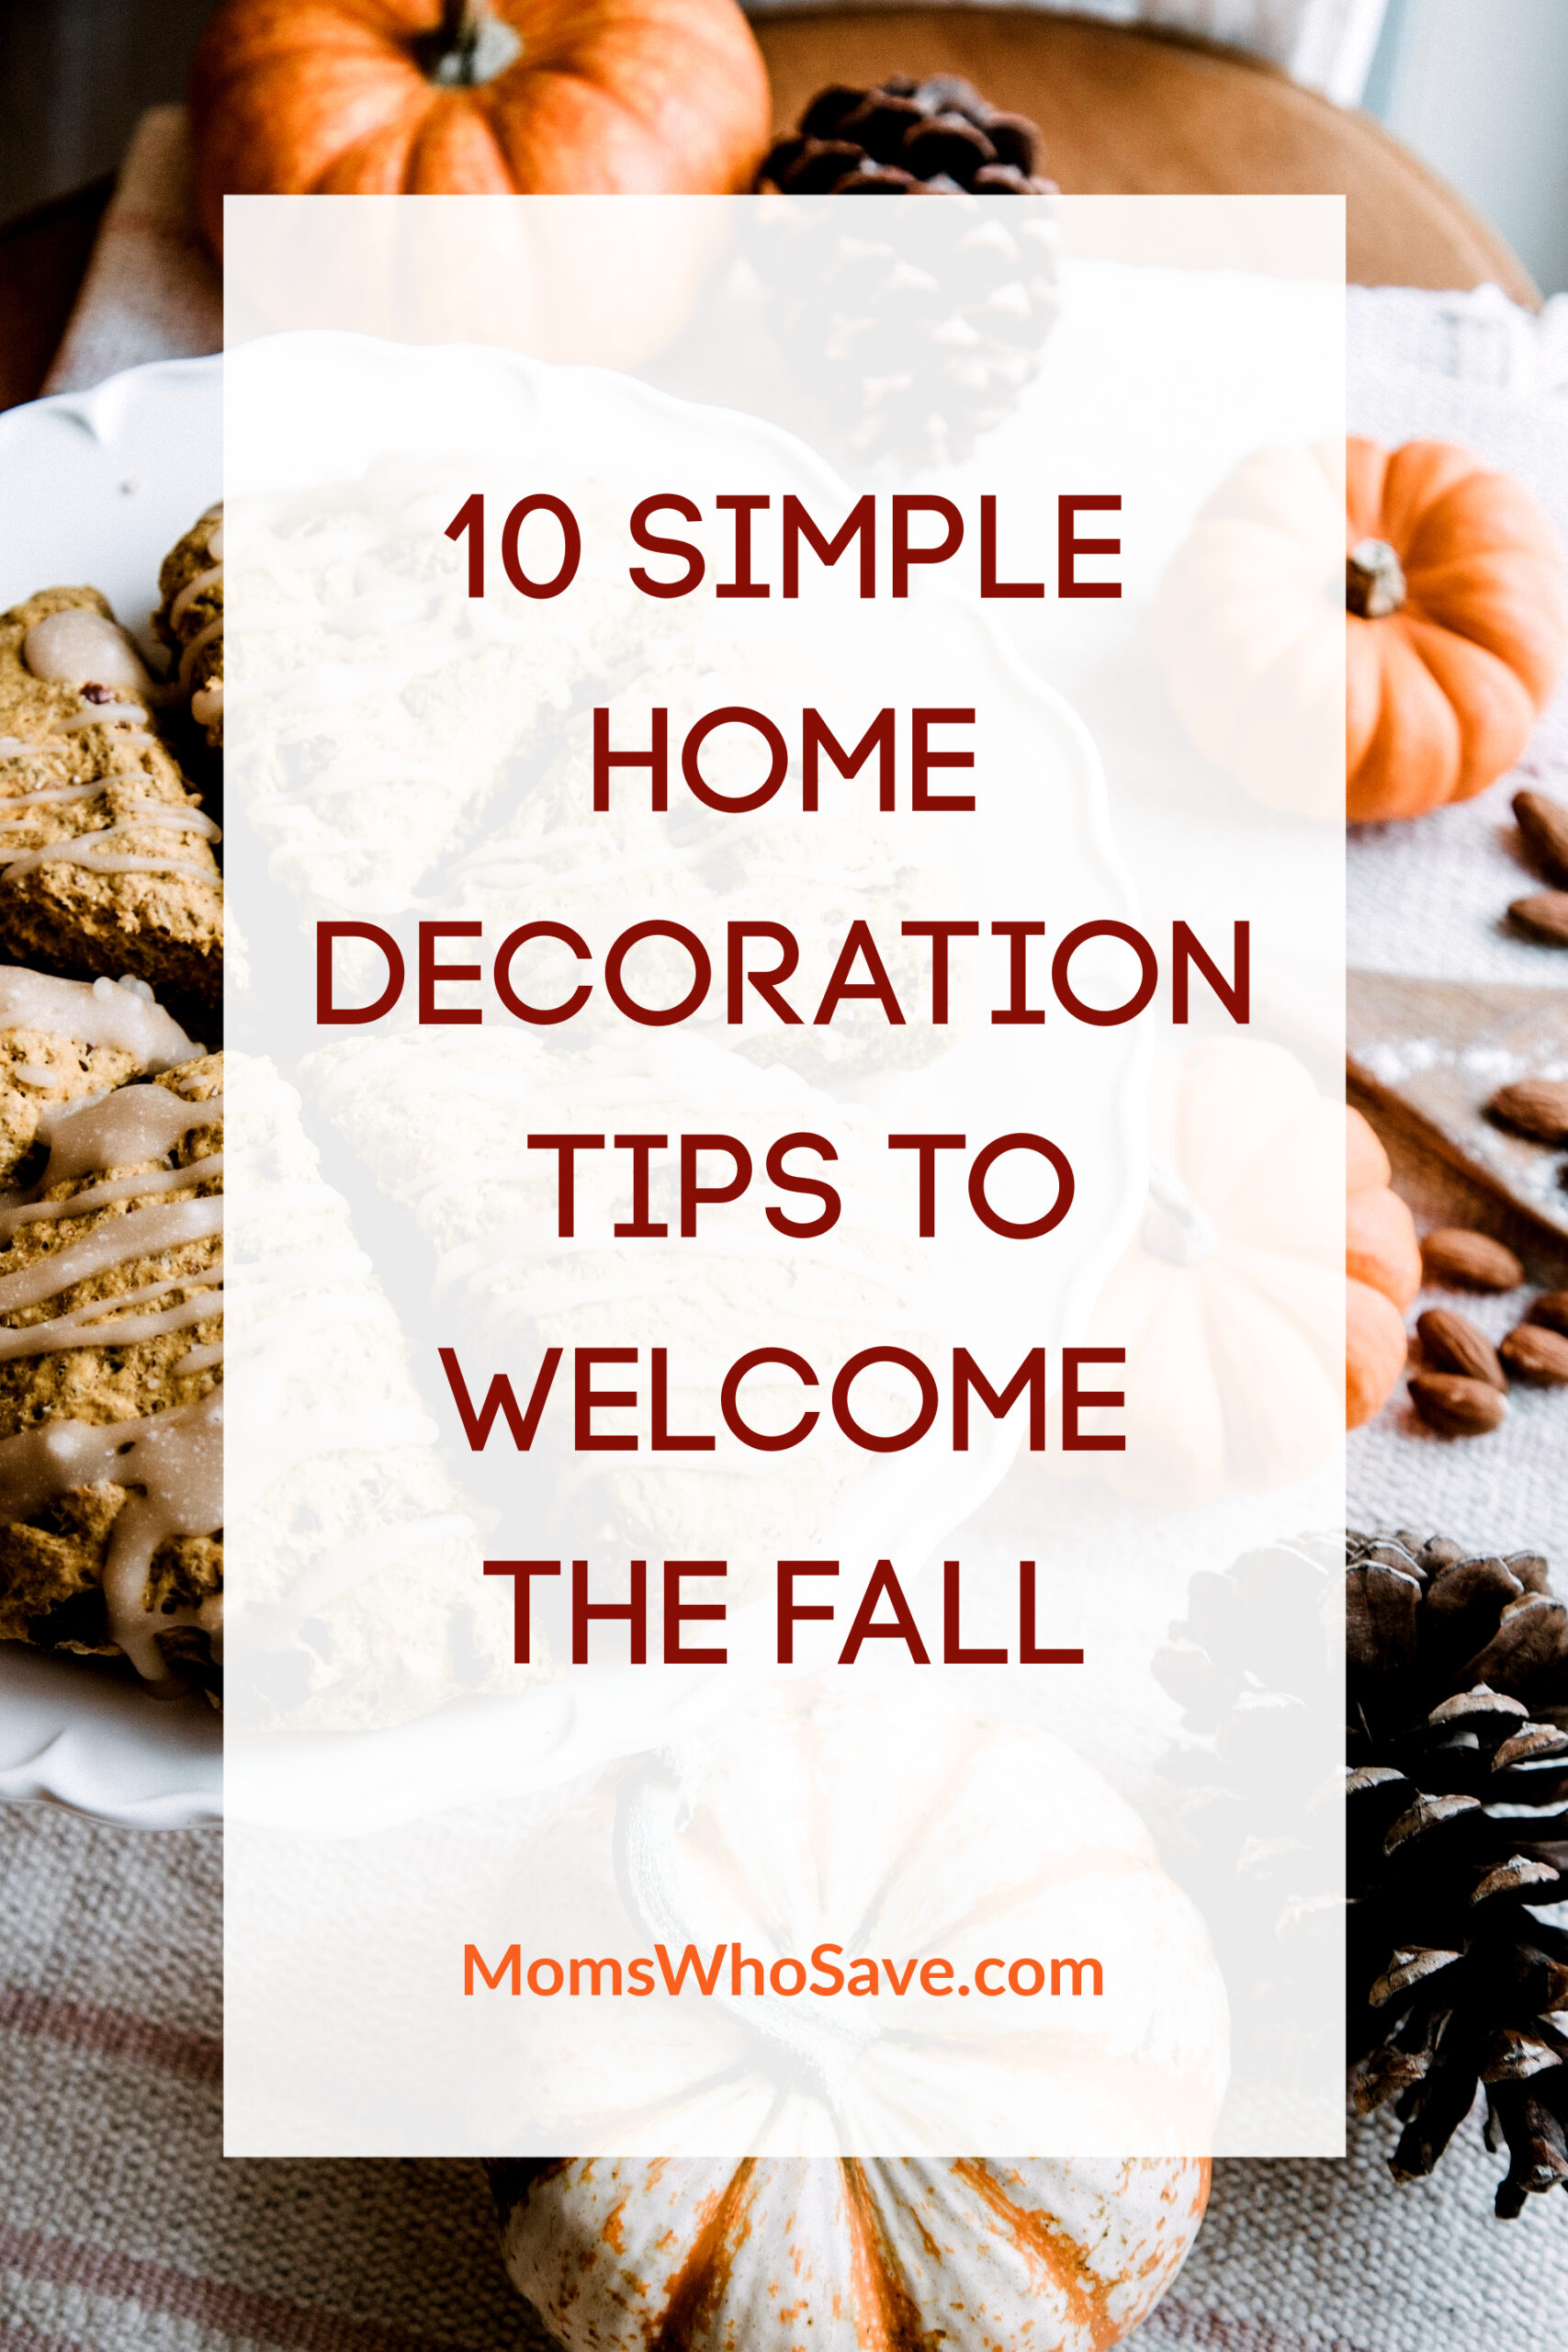 10 Simple Home Decoration Tips to Welcome Fall